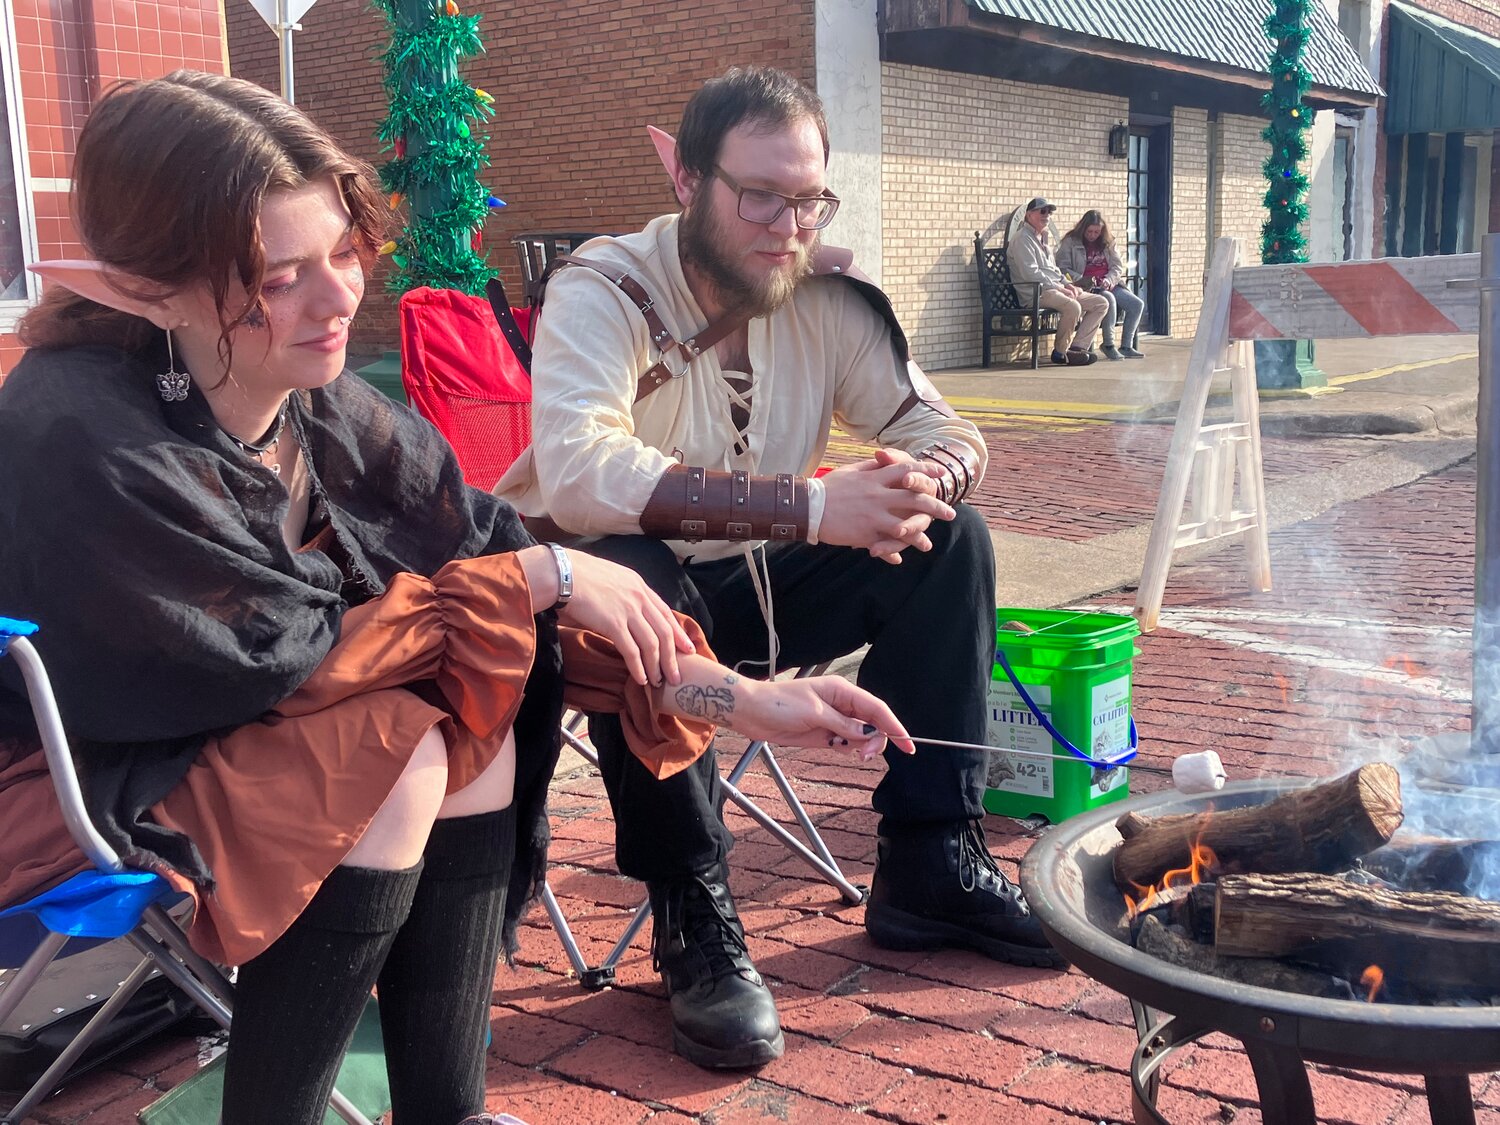 At Saturday’s Celtic Christmas event in Mineola, elves roast s’mores.